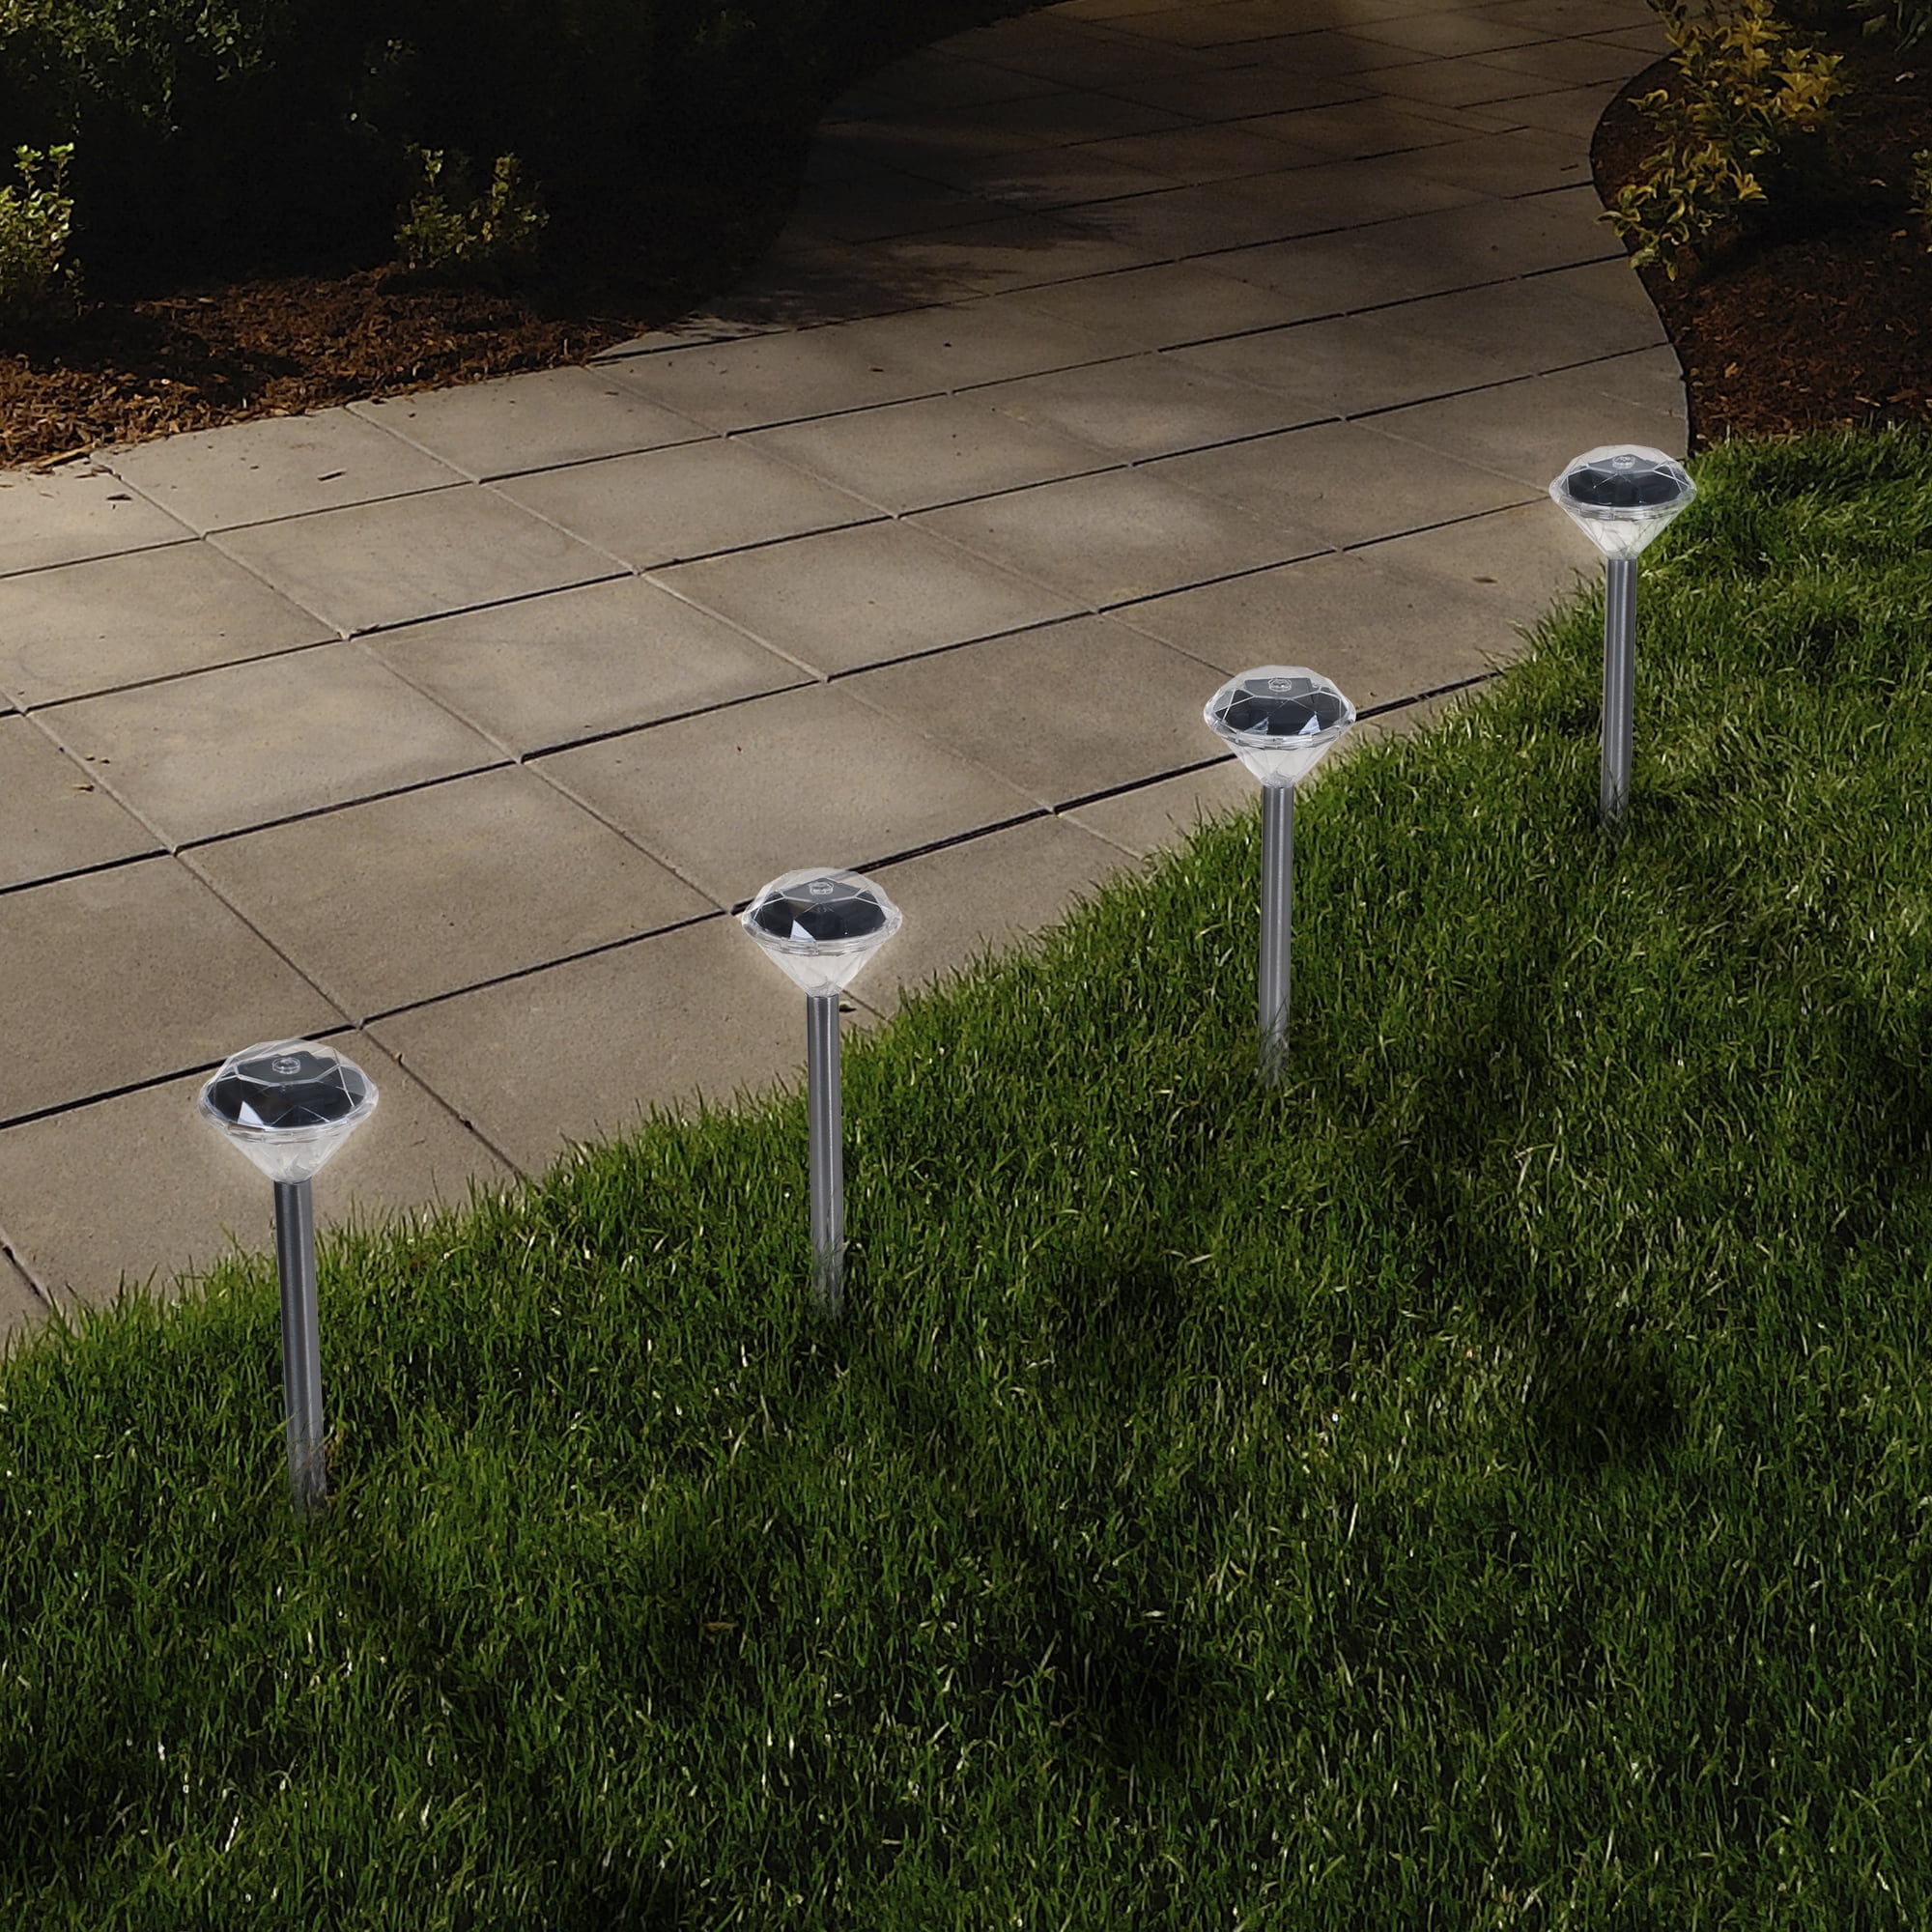 Diamond Stake Solar Powered LED Walkway Pathway Garden Lawn Decor Outdoor Lamps